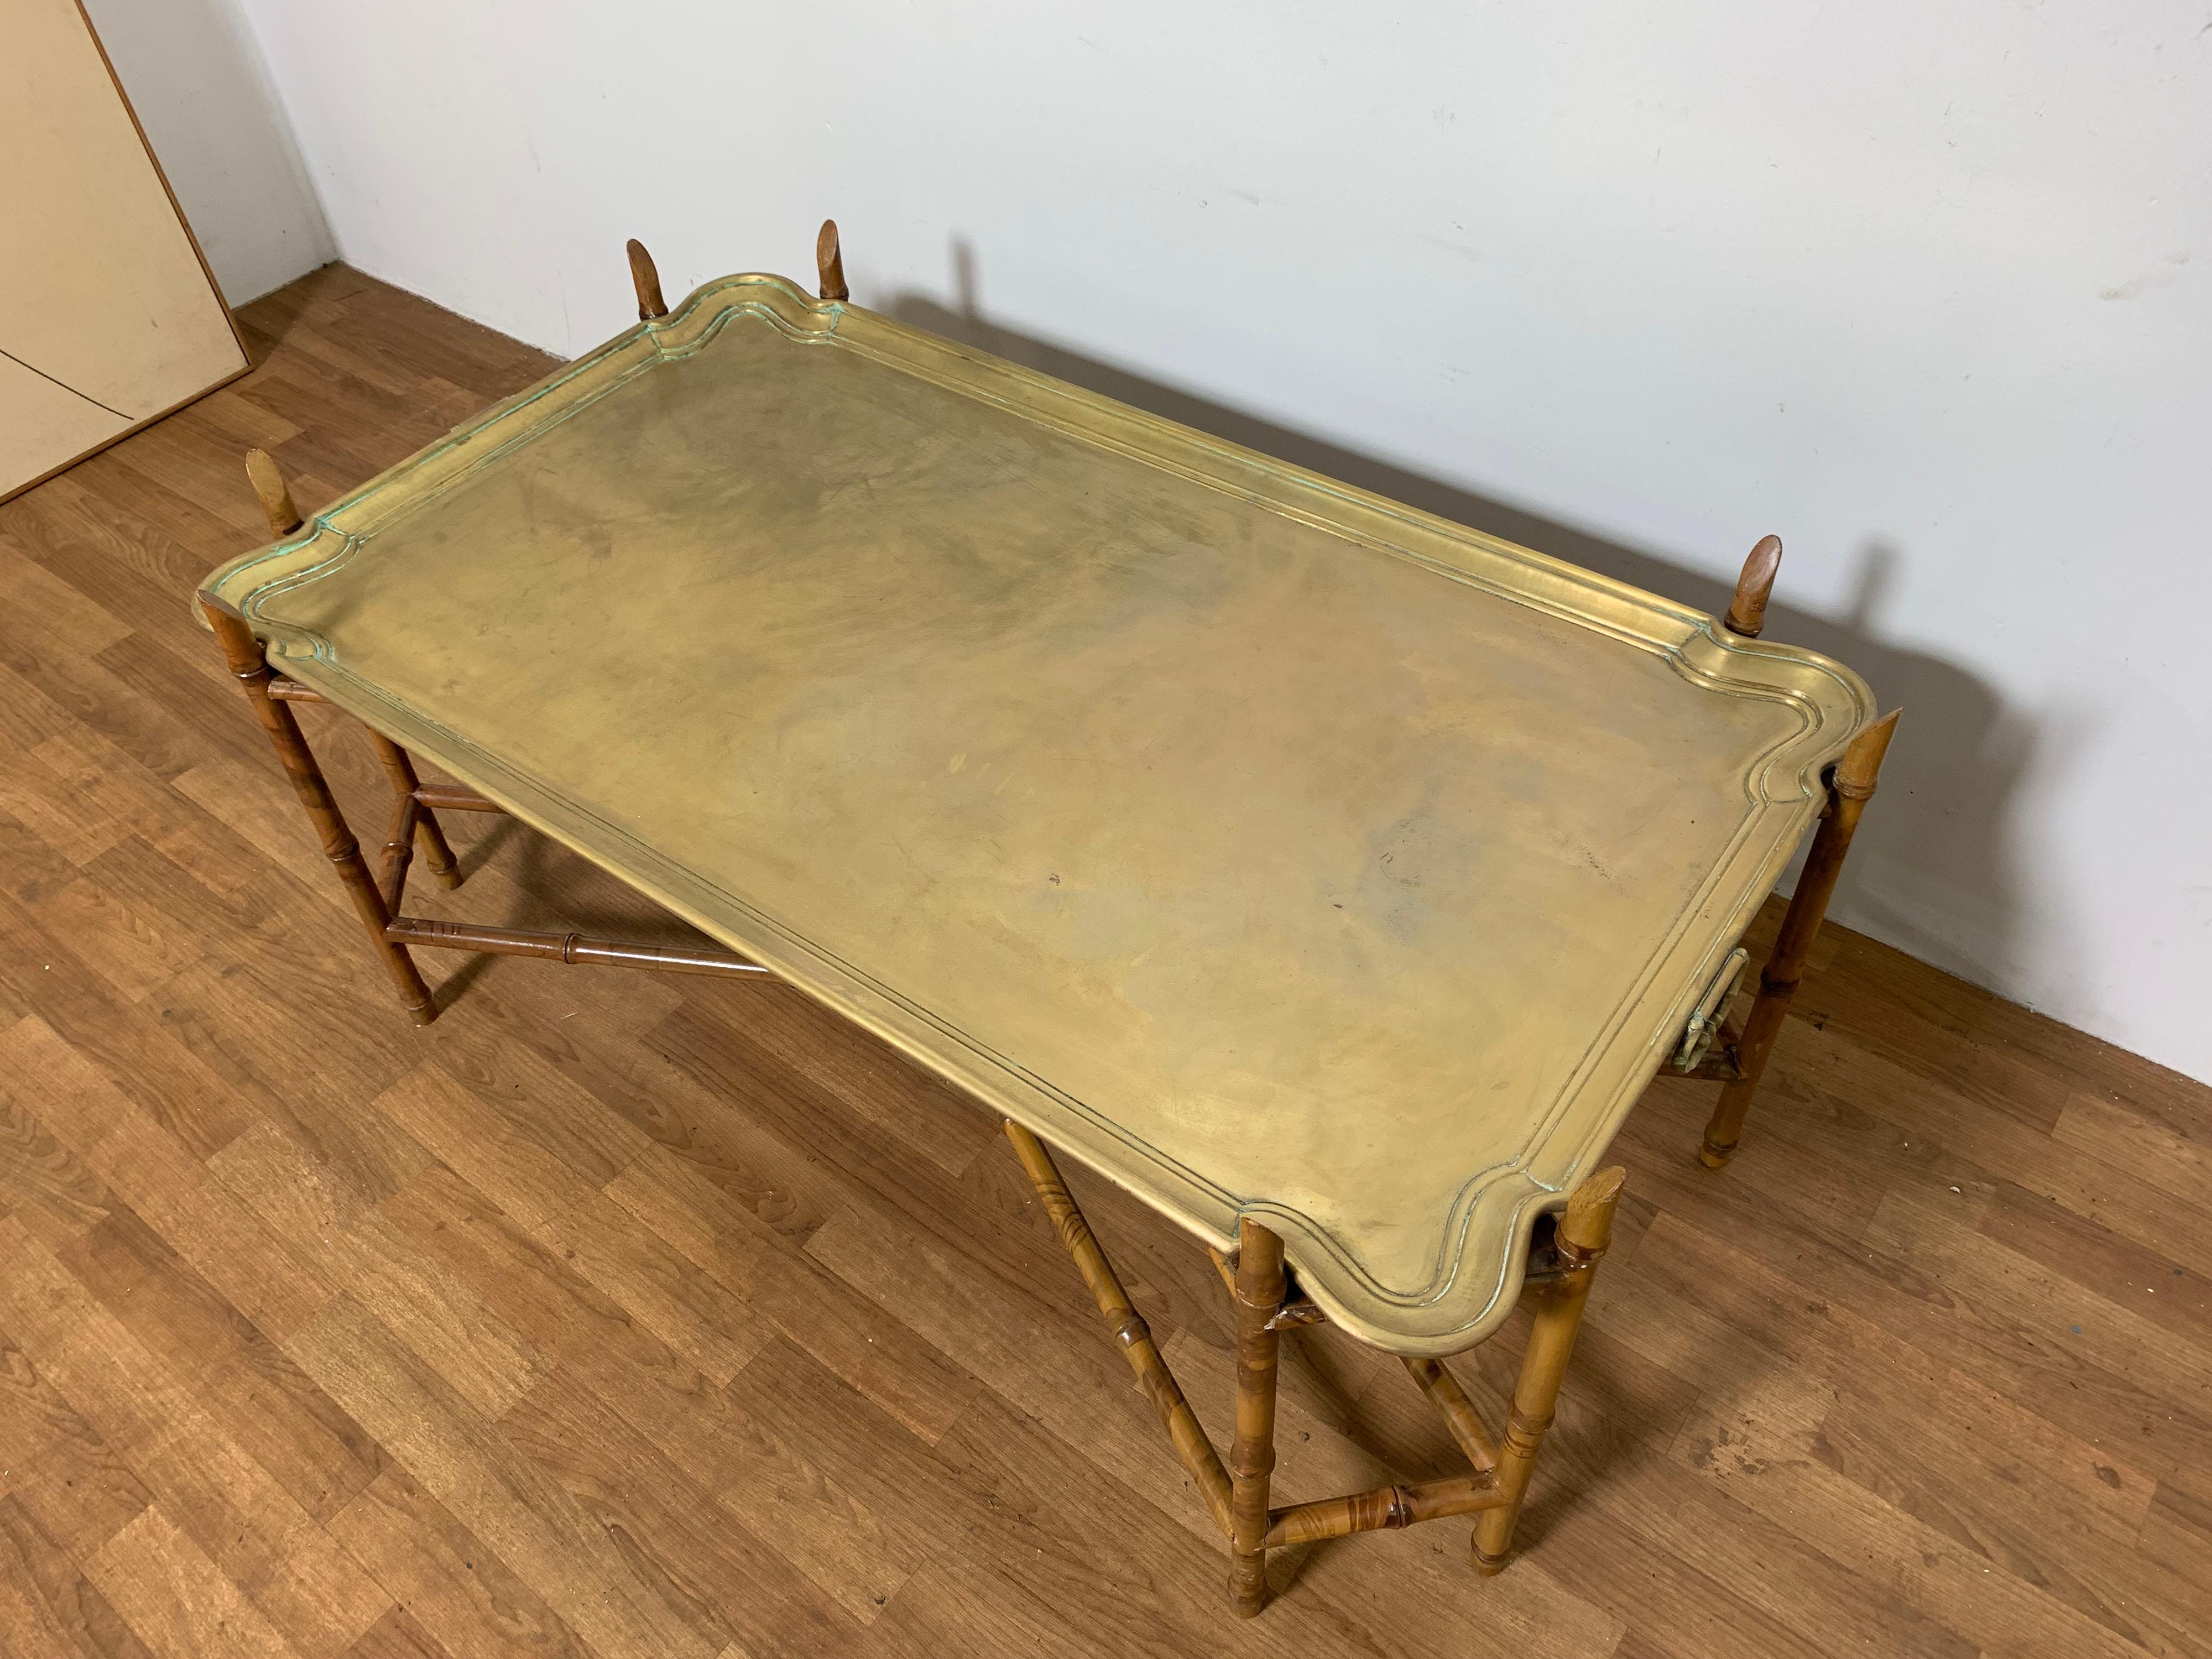 English or Hollywood Regency style coffee table attributed to Baker, featuring a removable brass butler’s tray atop a carved wood faux bamboo base, circa 1950s.
Measures: 21